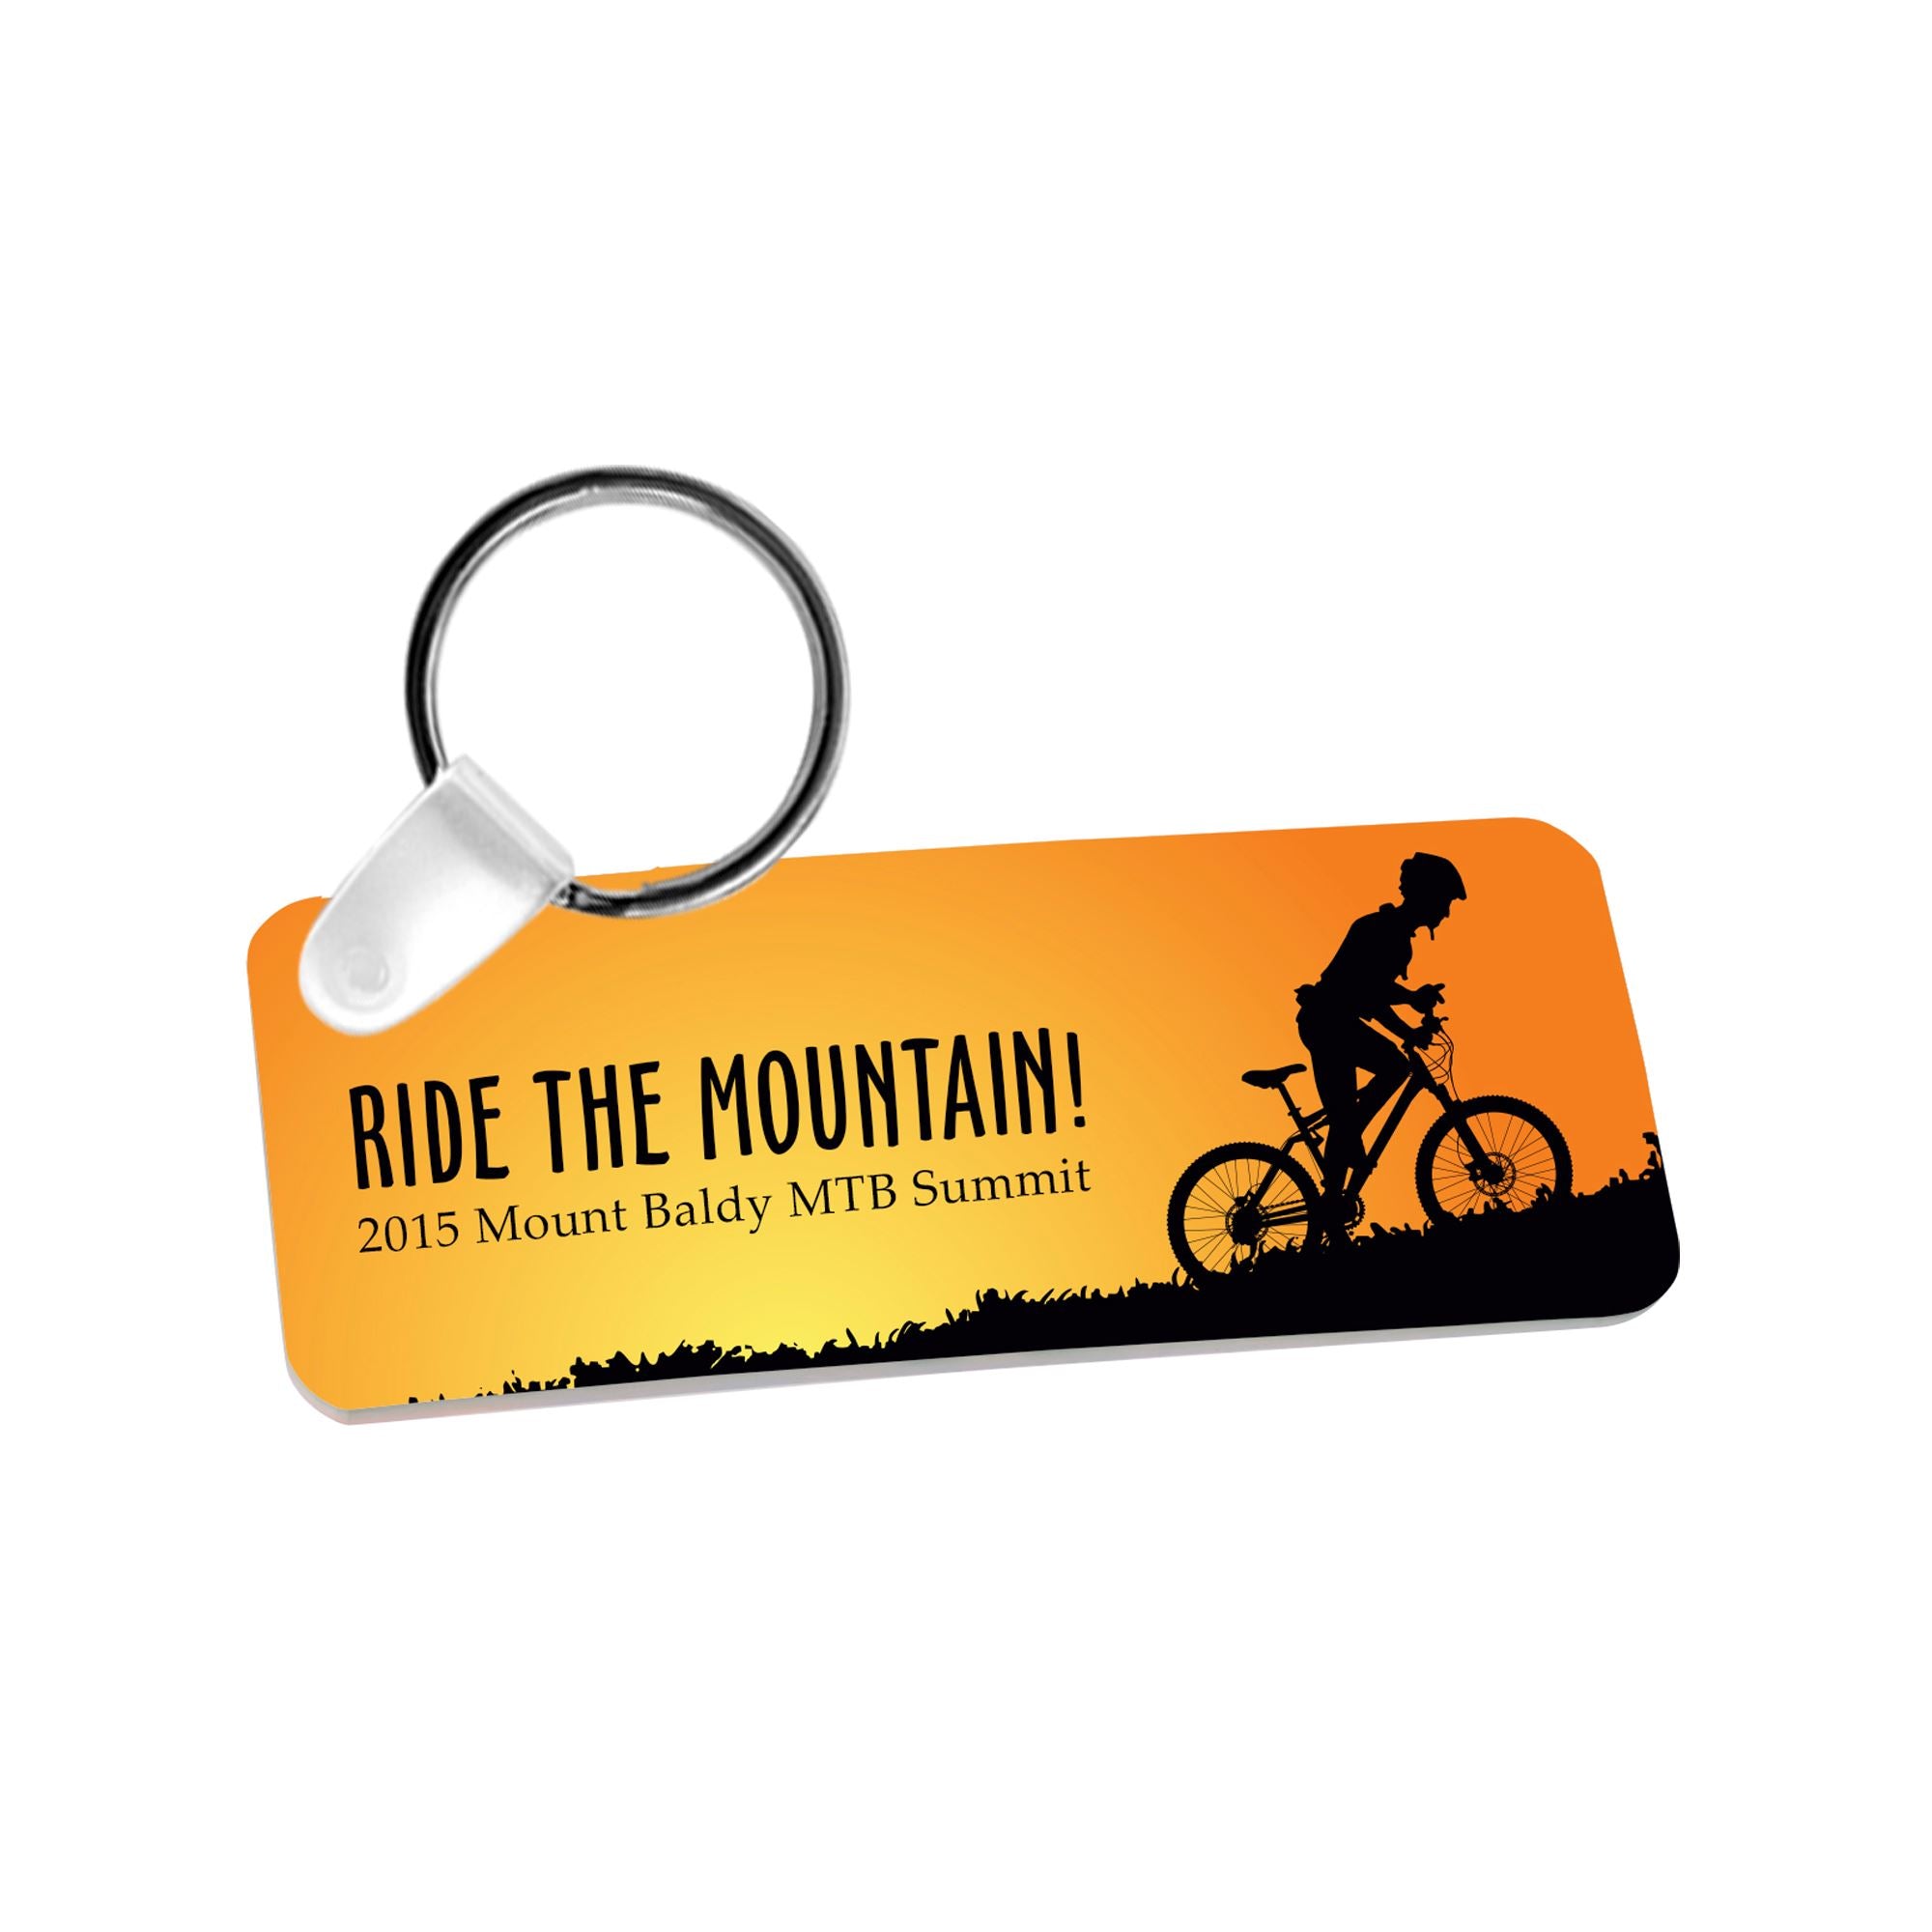 Customized Made Metal Blank Sublimation Keychains A22 - China